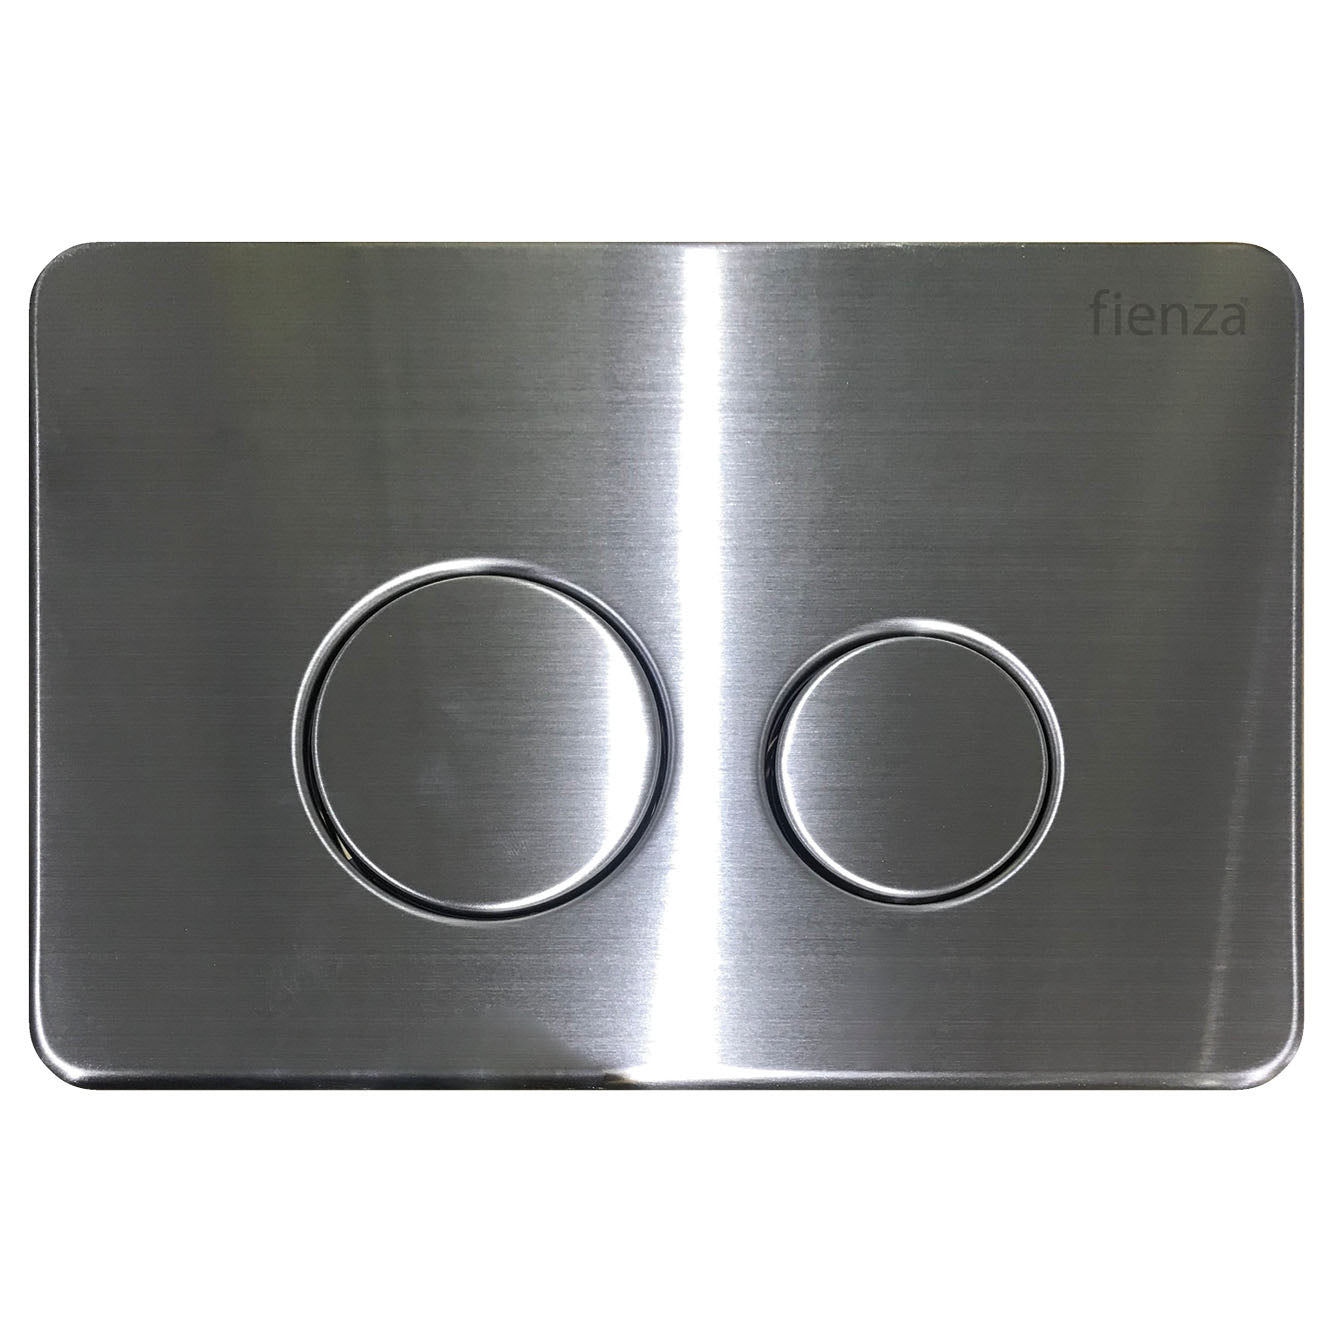 Fienza R&T Round Button Flush Plate, 6 Colours , Brushed Stainless Steel